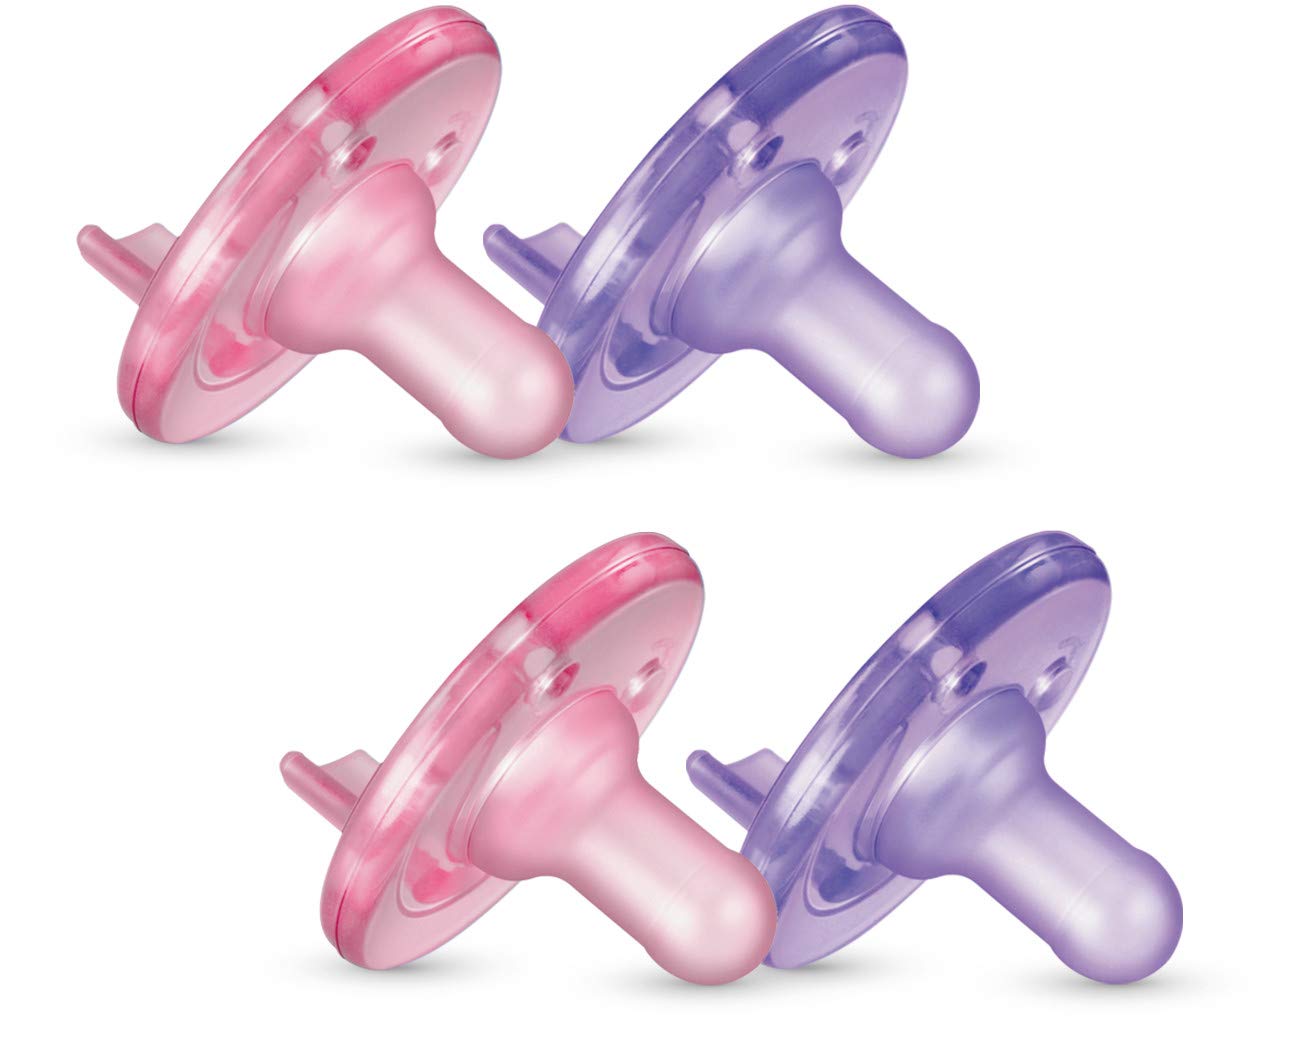 Philips Avent BPA-Free Silicone Avent Pacifier, 4-Pack